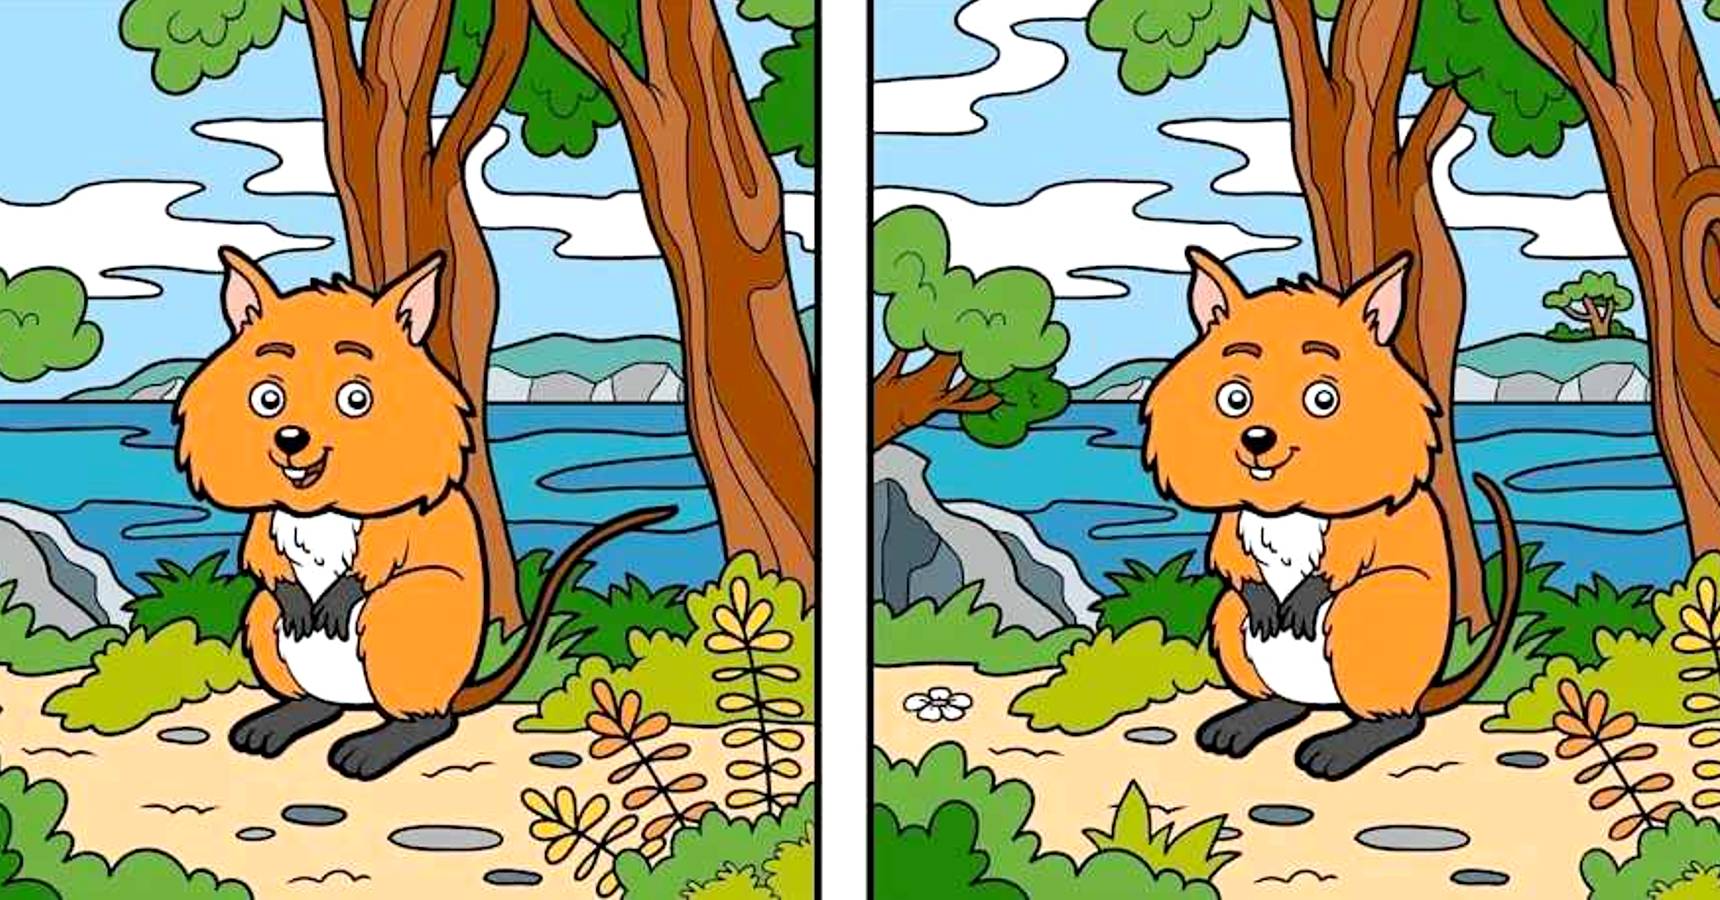 Brain teaser can you spot 10 differences within 19 seconds